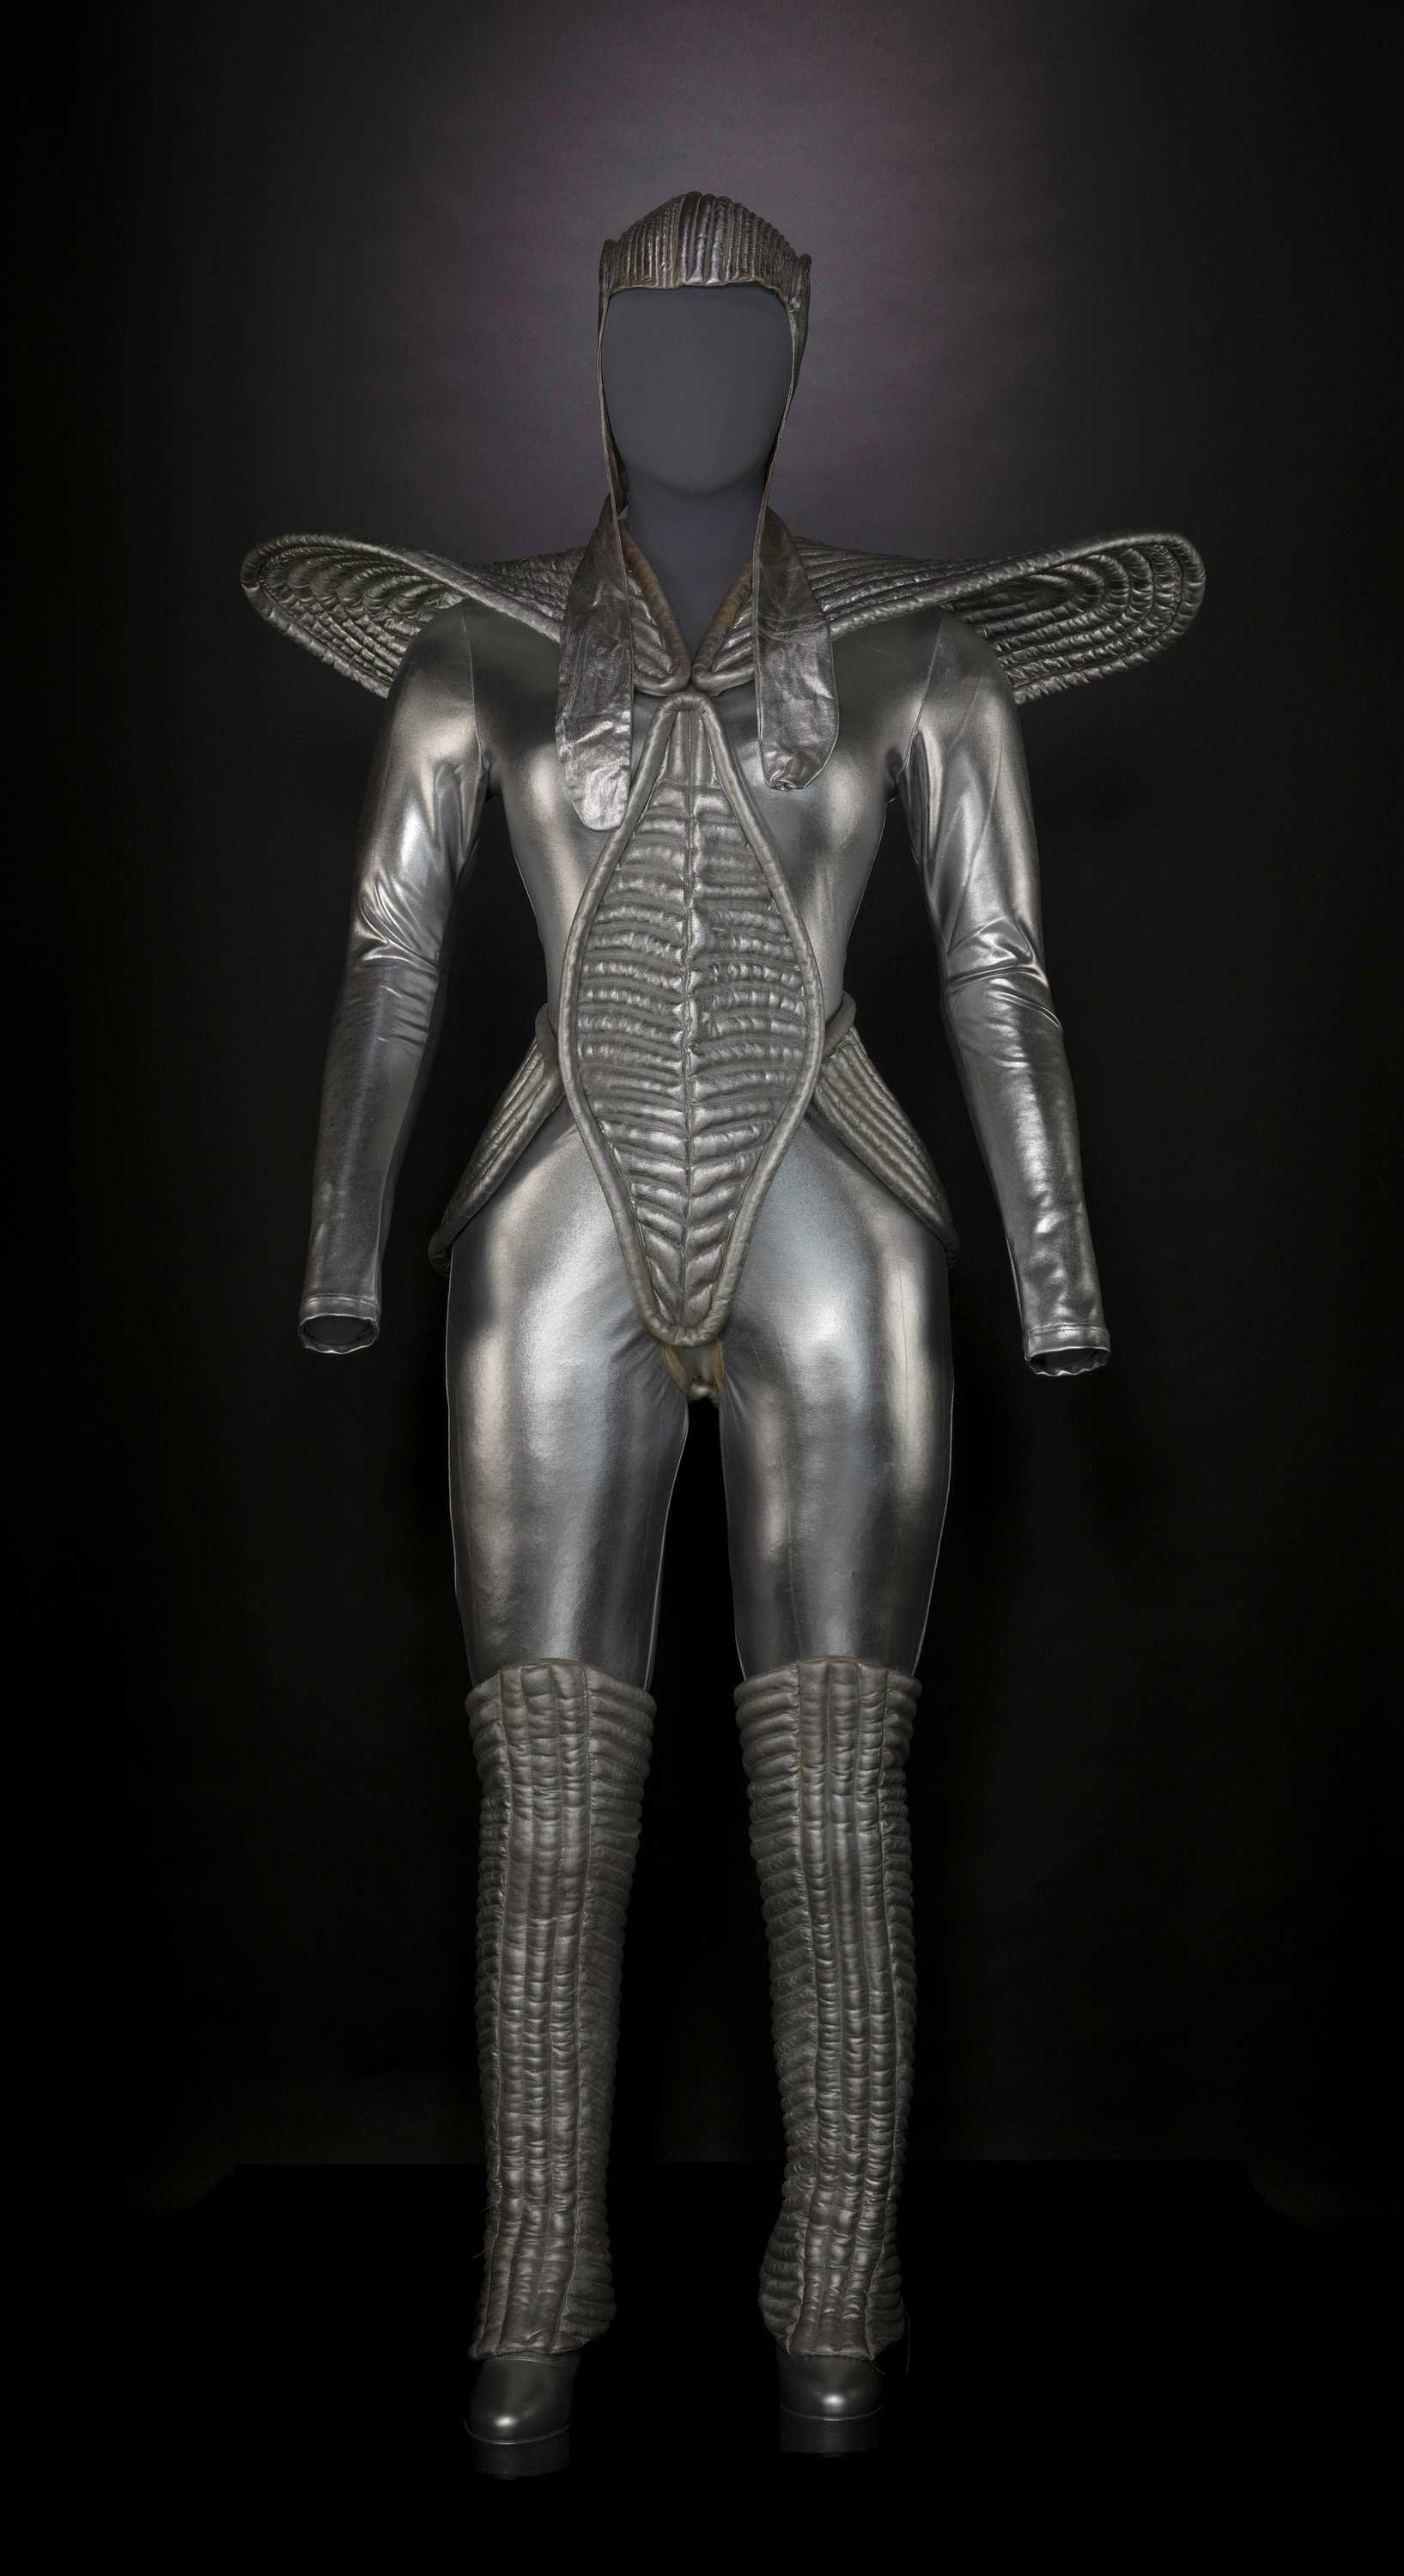 A silver spacesuit like costume covers her head and has oversized shoulder pads.